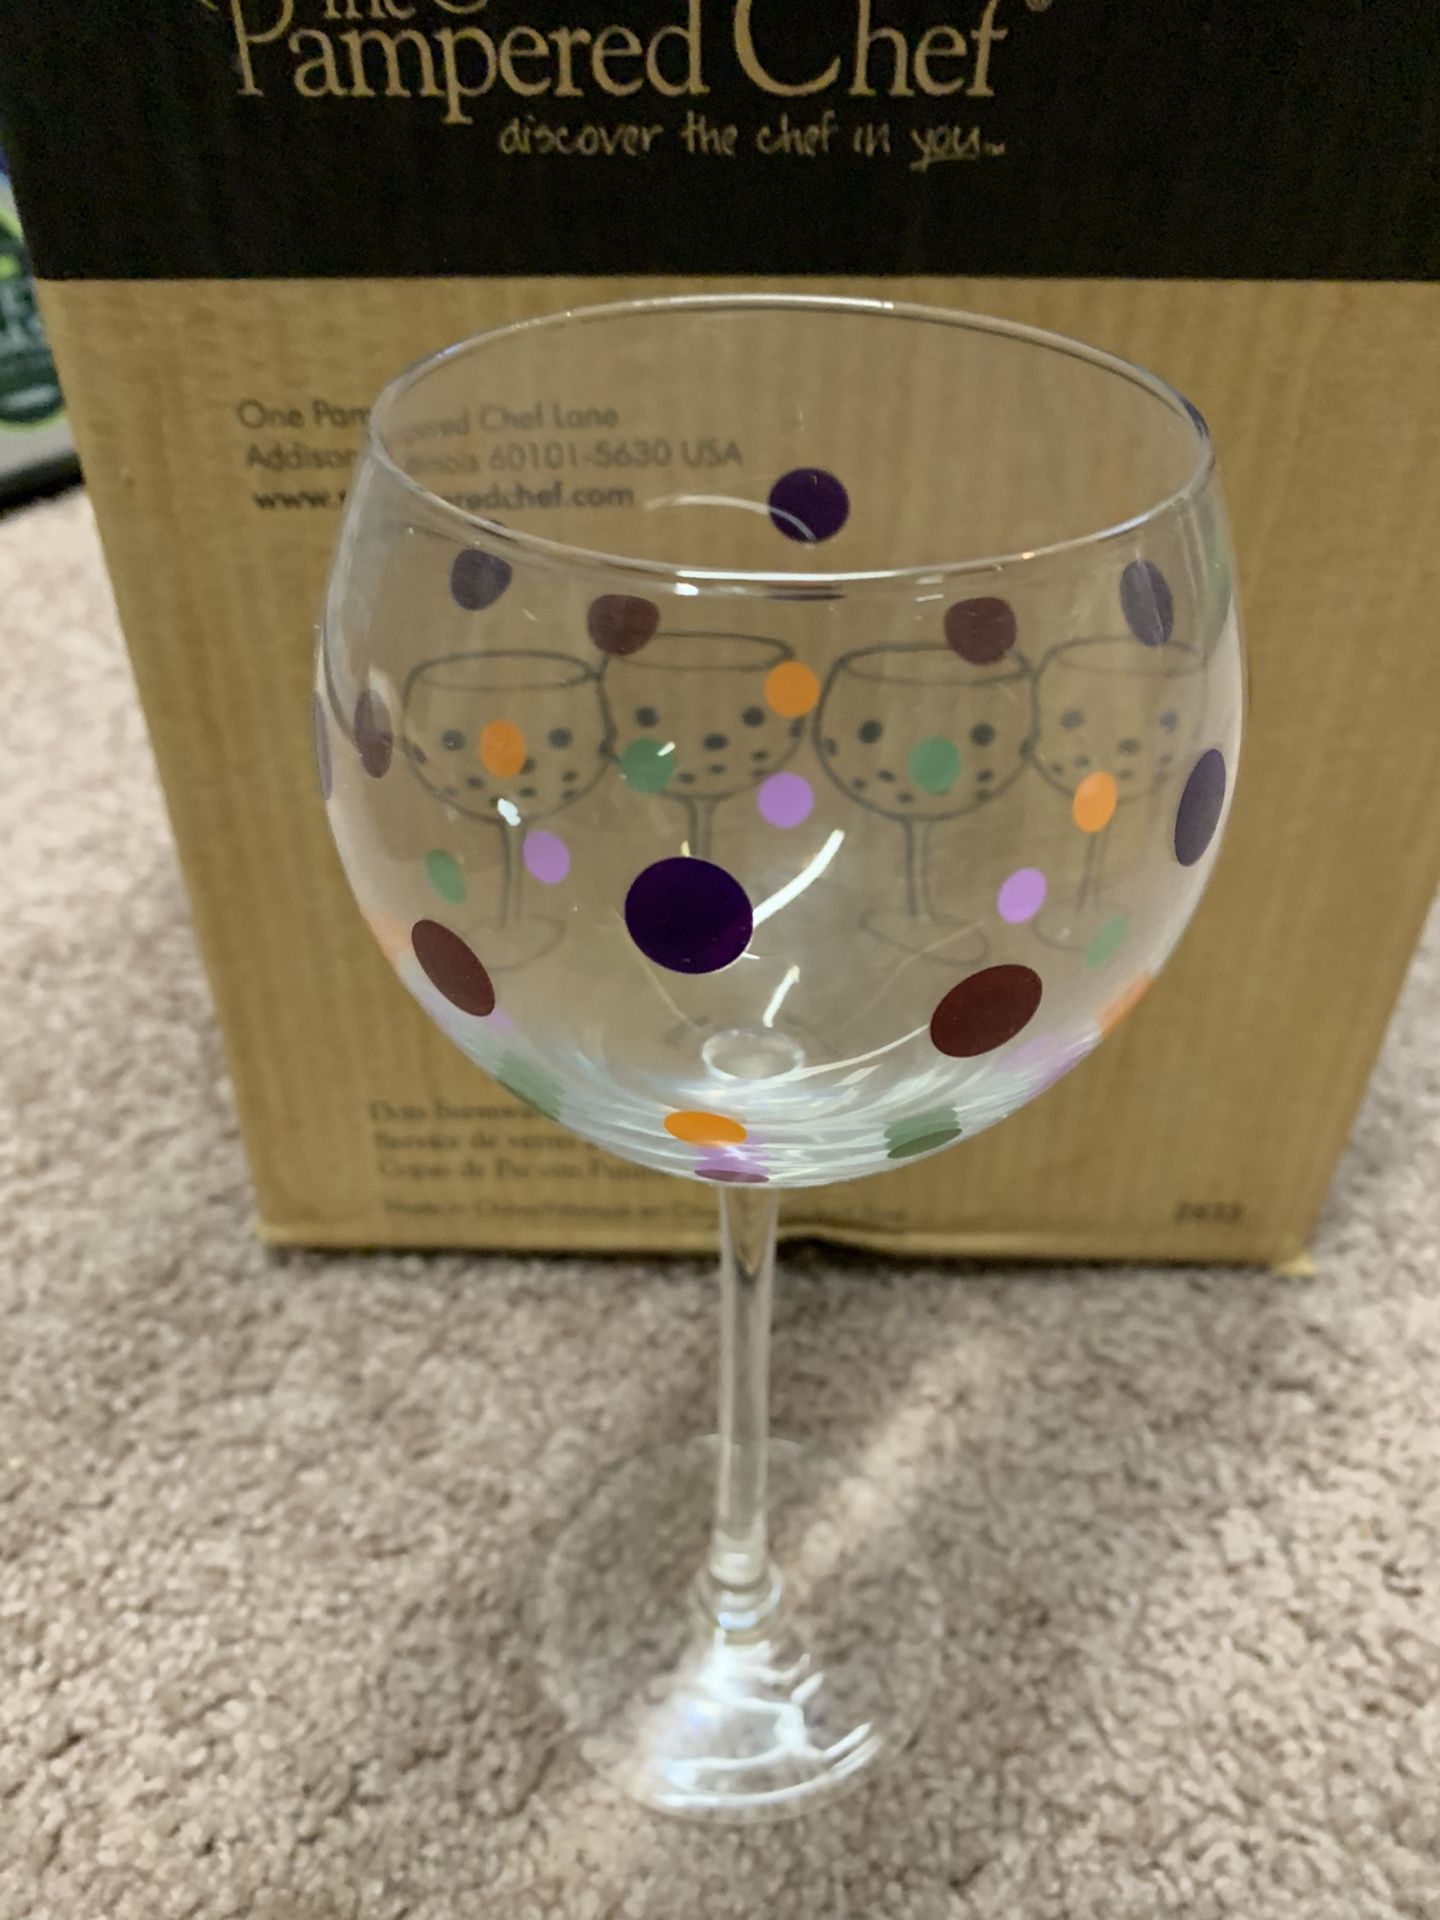 Pampered Chef Dots wine glasses (set of 4)